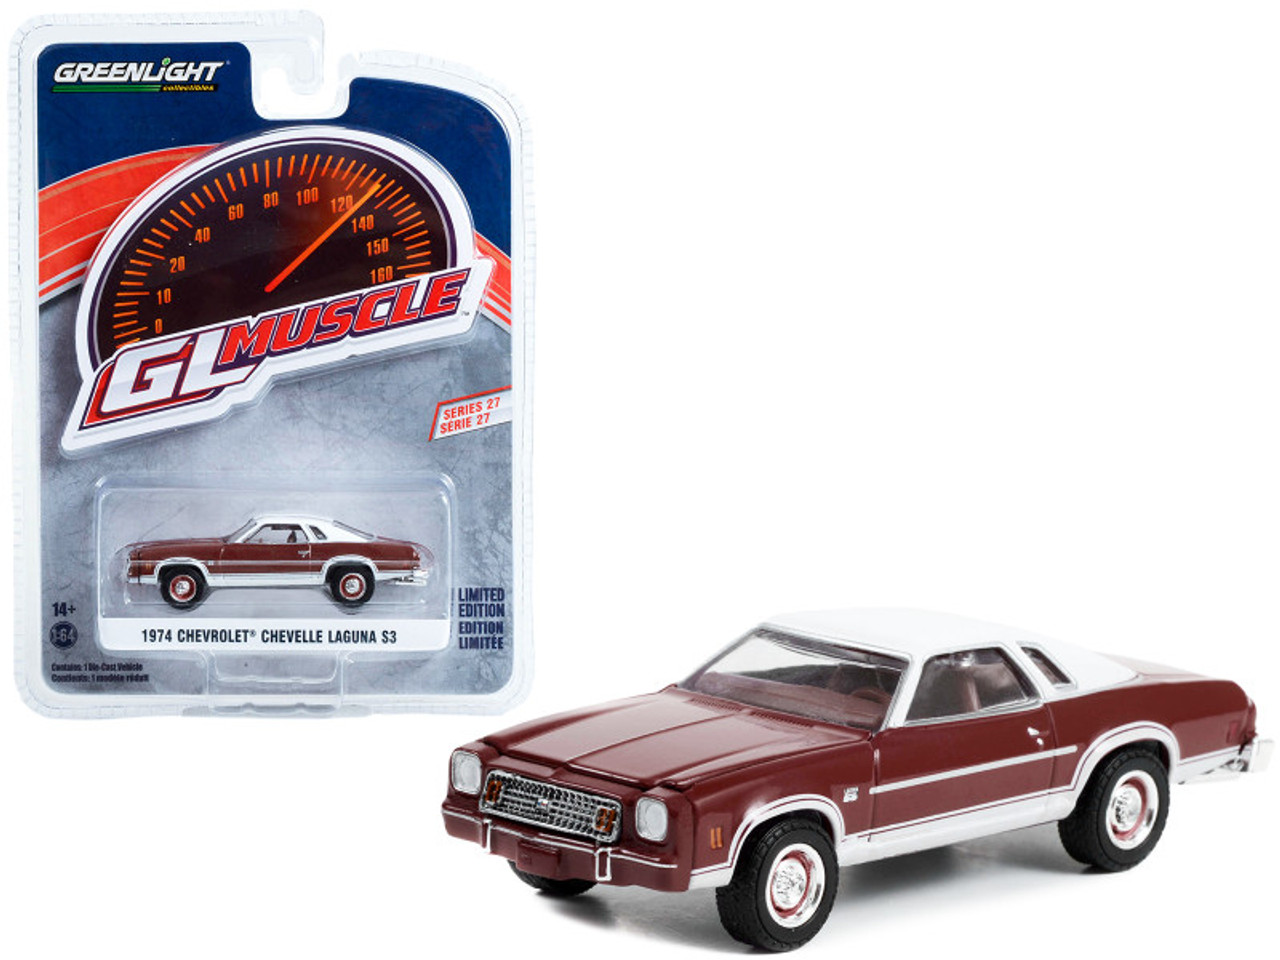 1974 Chevrolet Chevelle Laguna S3 Medium Red Metallic with White Top "Greenlight Muscle" Series 27 1/64 Diecast Model Car by Greenlight